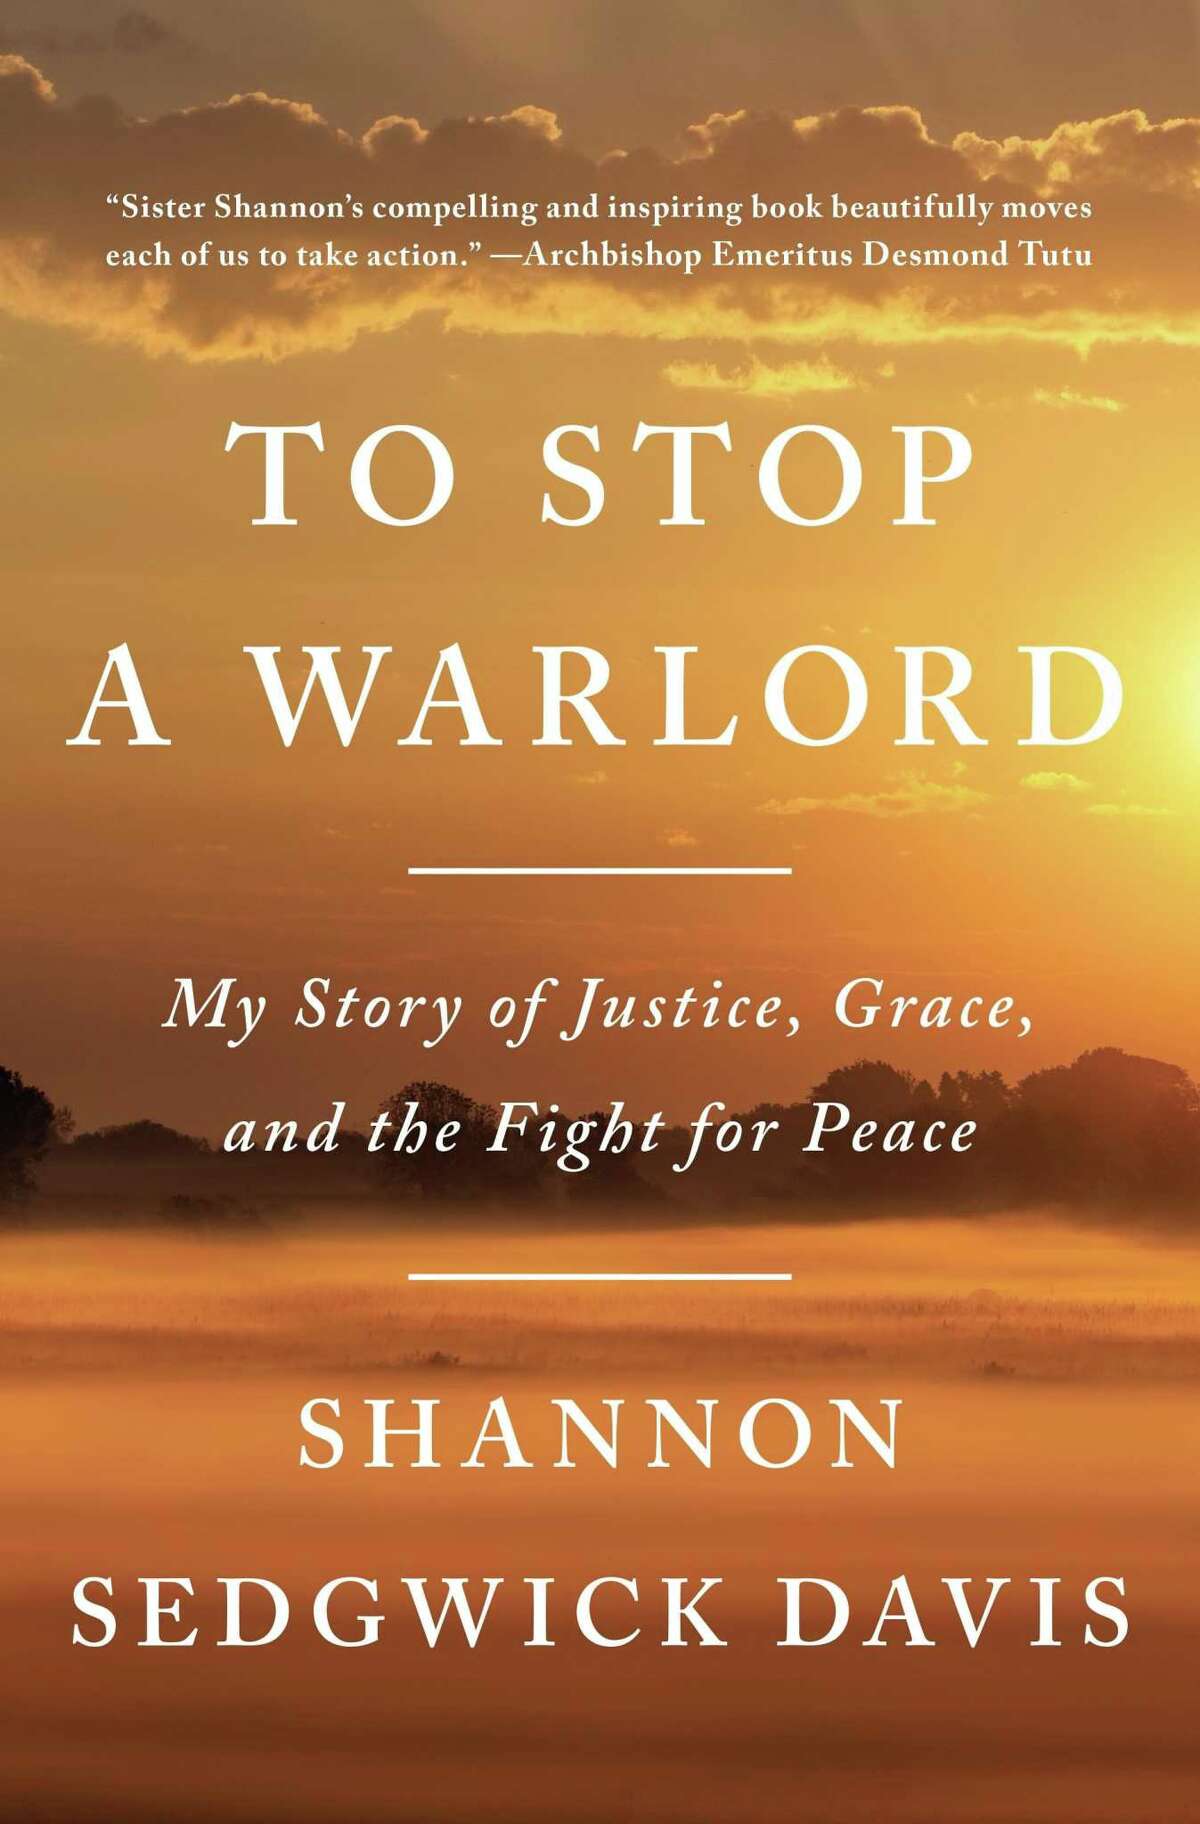 “To Stop a Warlord” is both a personal memoir and a compelling tale of efforts to end atrocities in Uganda and neighboring countries.